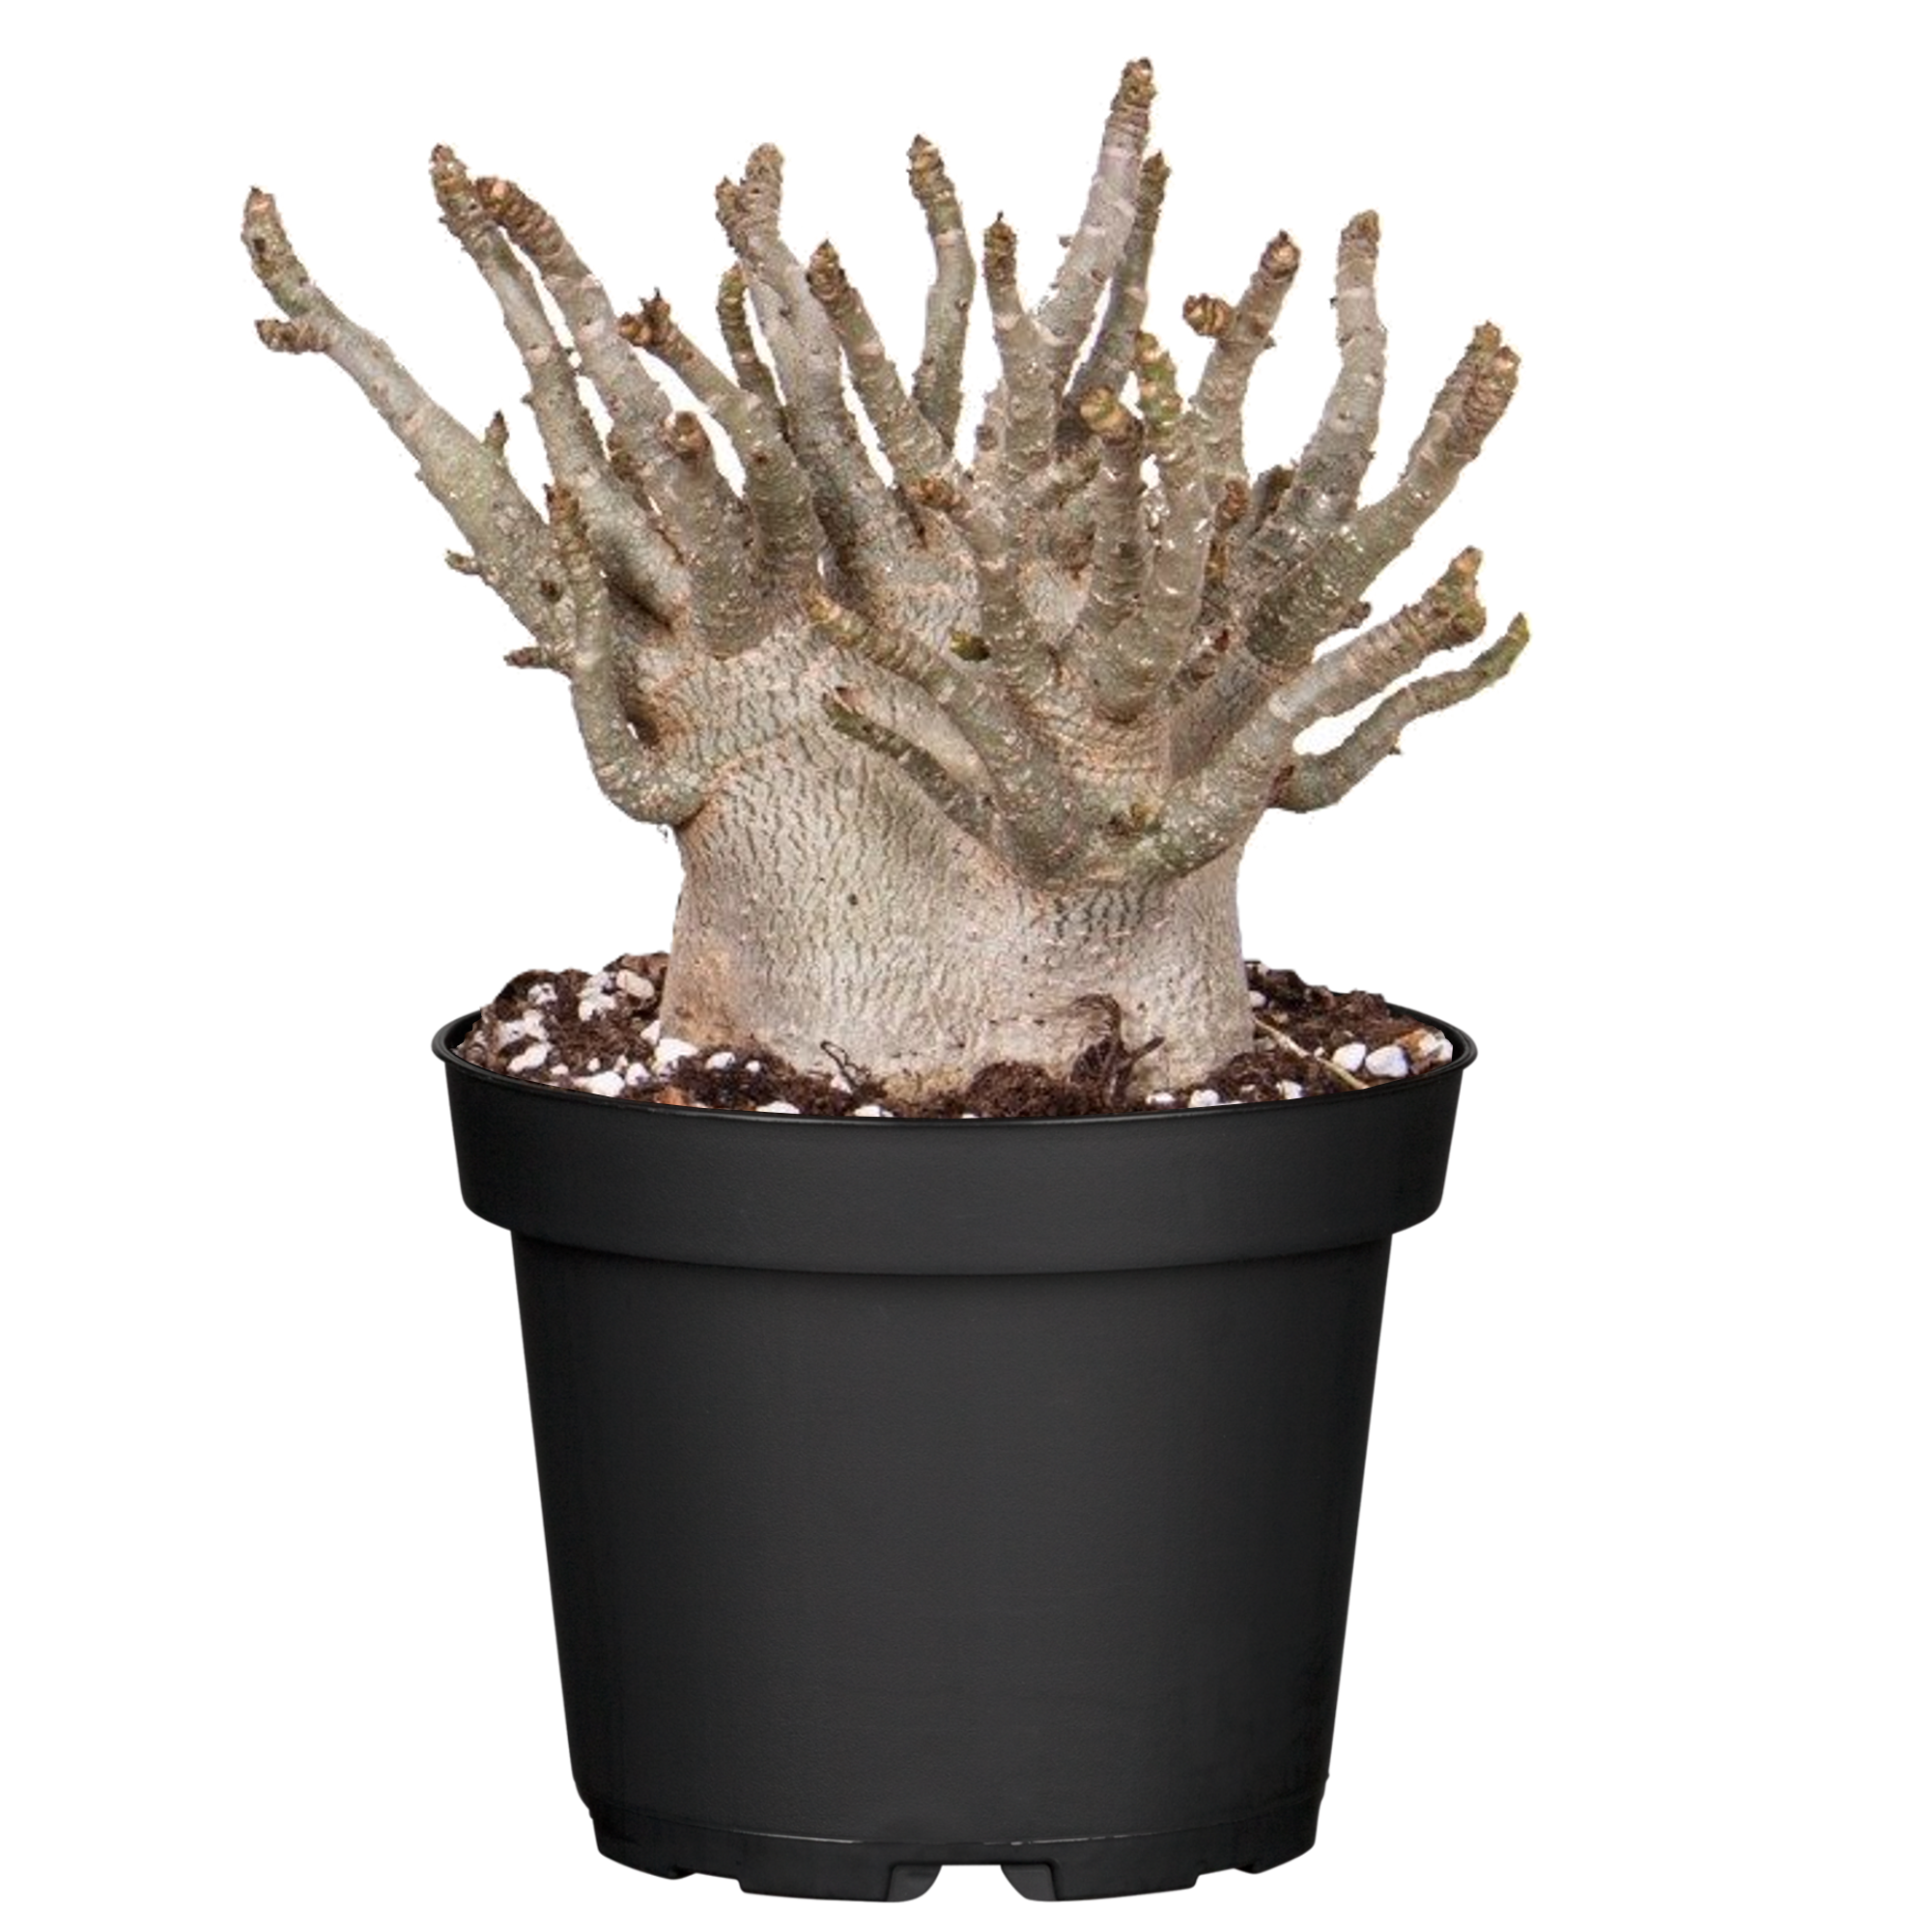 Wüstenrose 'Baobab' 15 cm Topf + product picture